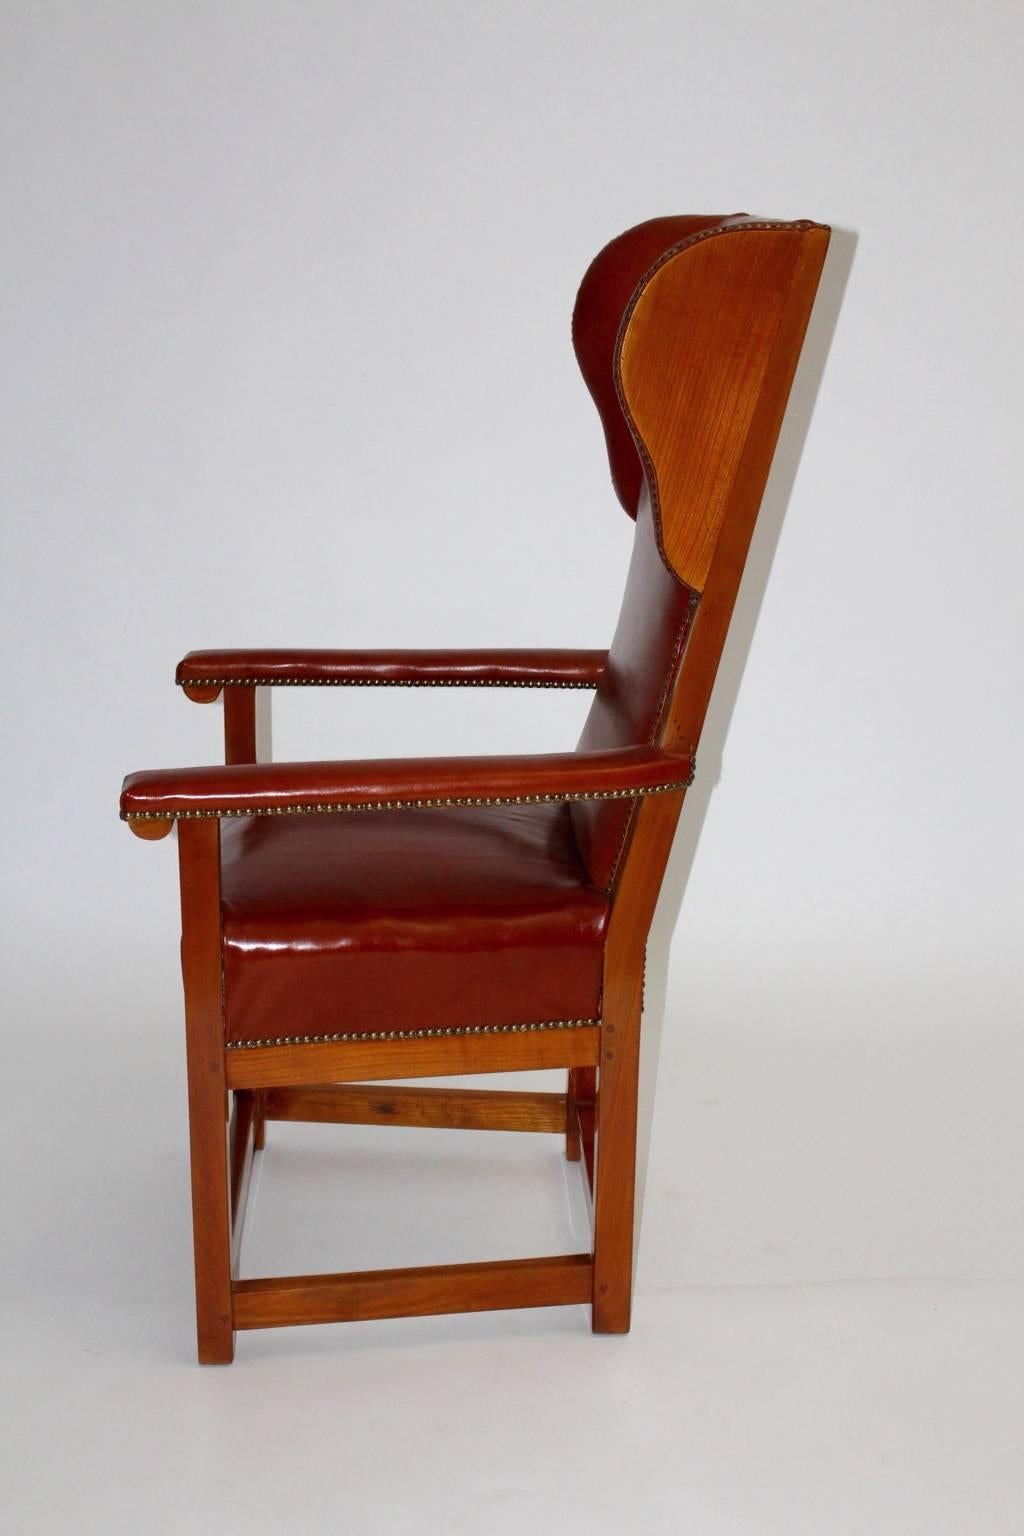 The Biedermeier wingback chair is made of solid cherrywood carefully cleaned and newly hand-polished.
Furthermore the renewed upholstery is covered with cognac leather and decorated with nails.

The condition of the Biedermeier wingback chair is